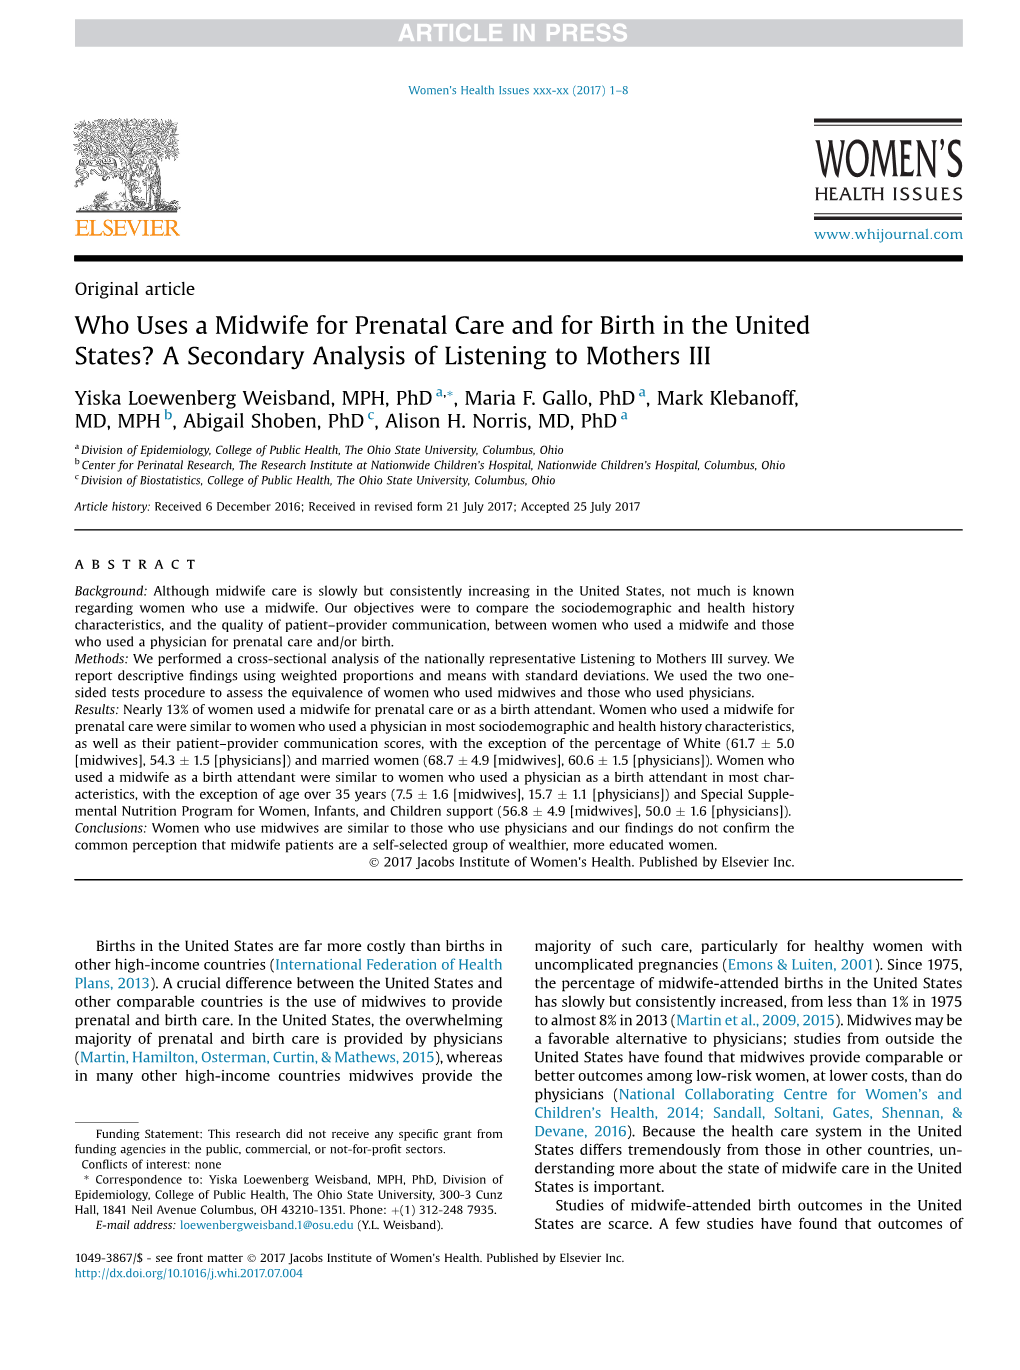 Who Uses a Midwife for Prenatal Care and for Birth in the United States? a Secondary Analysis of Listening to Mothers III